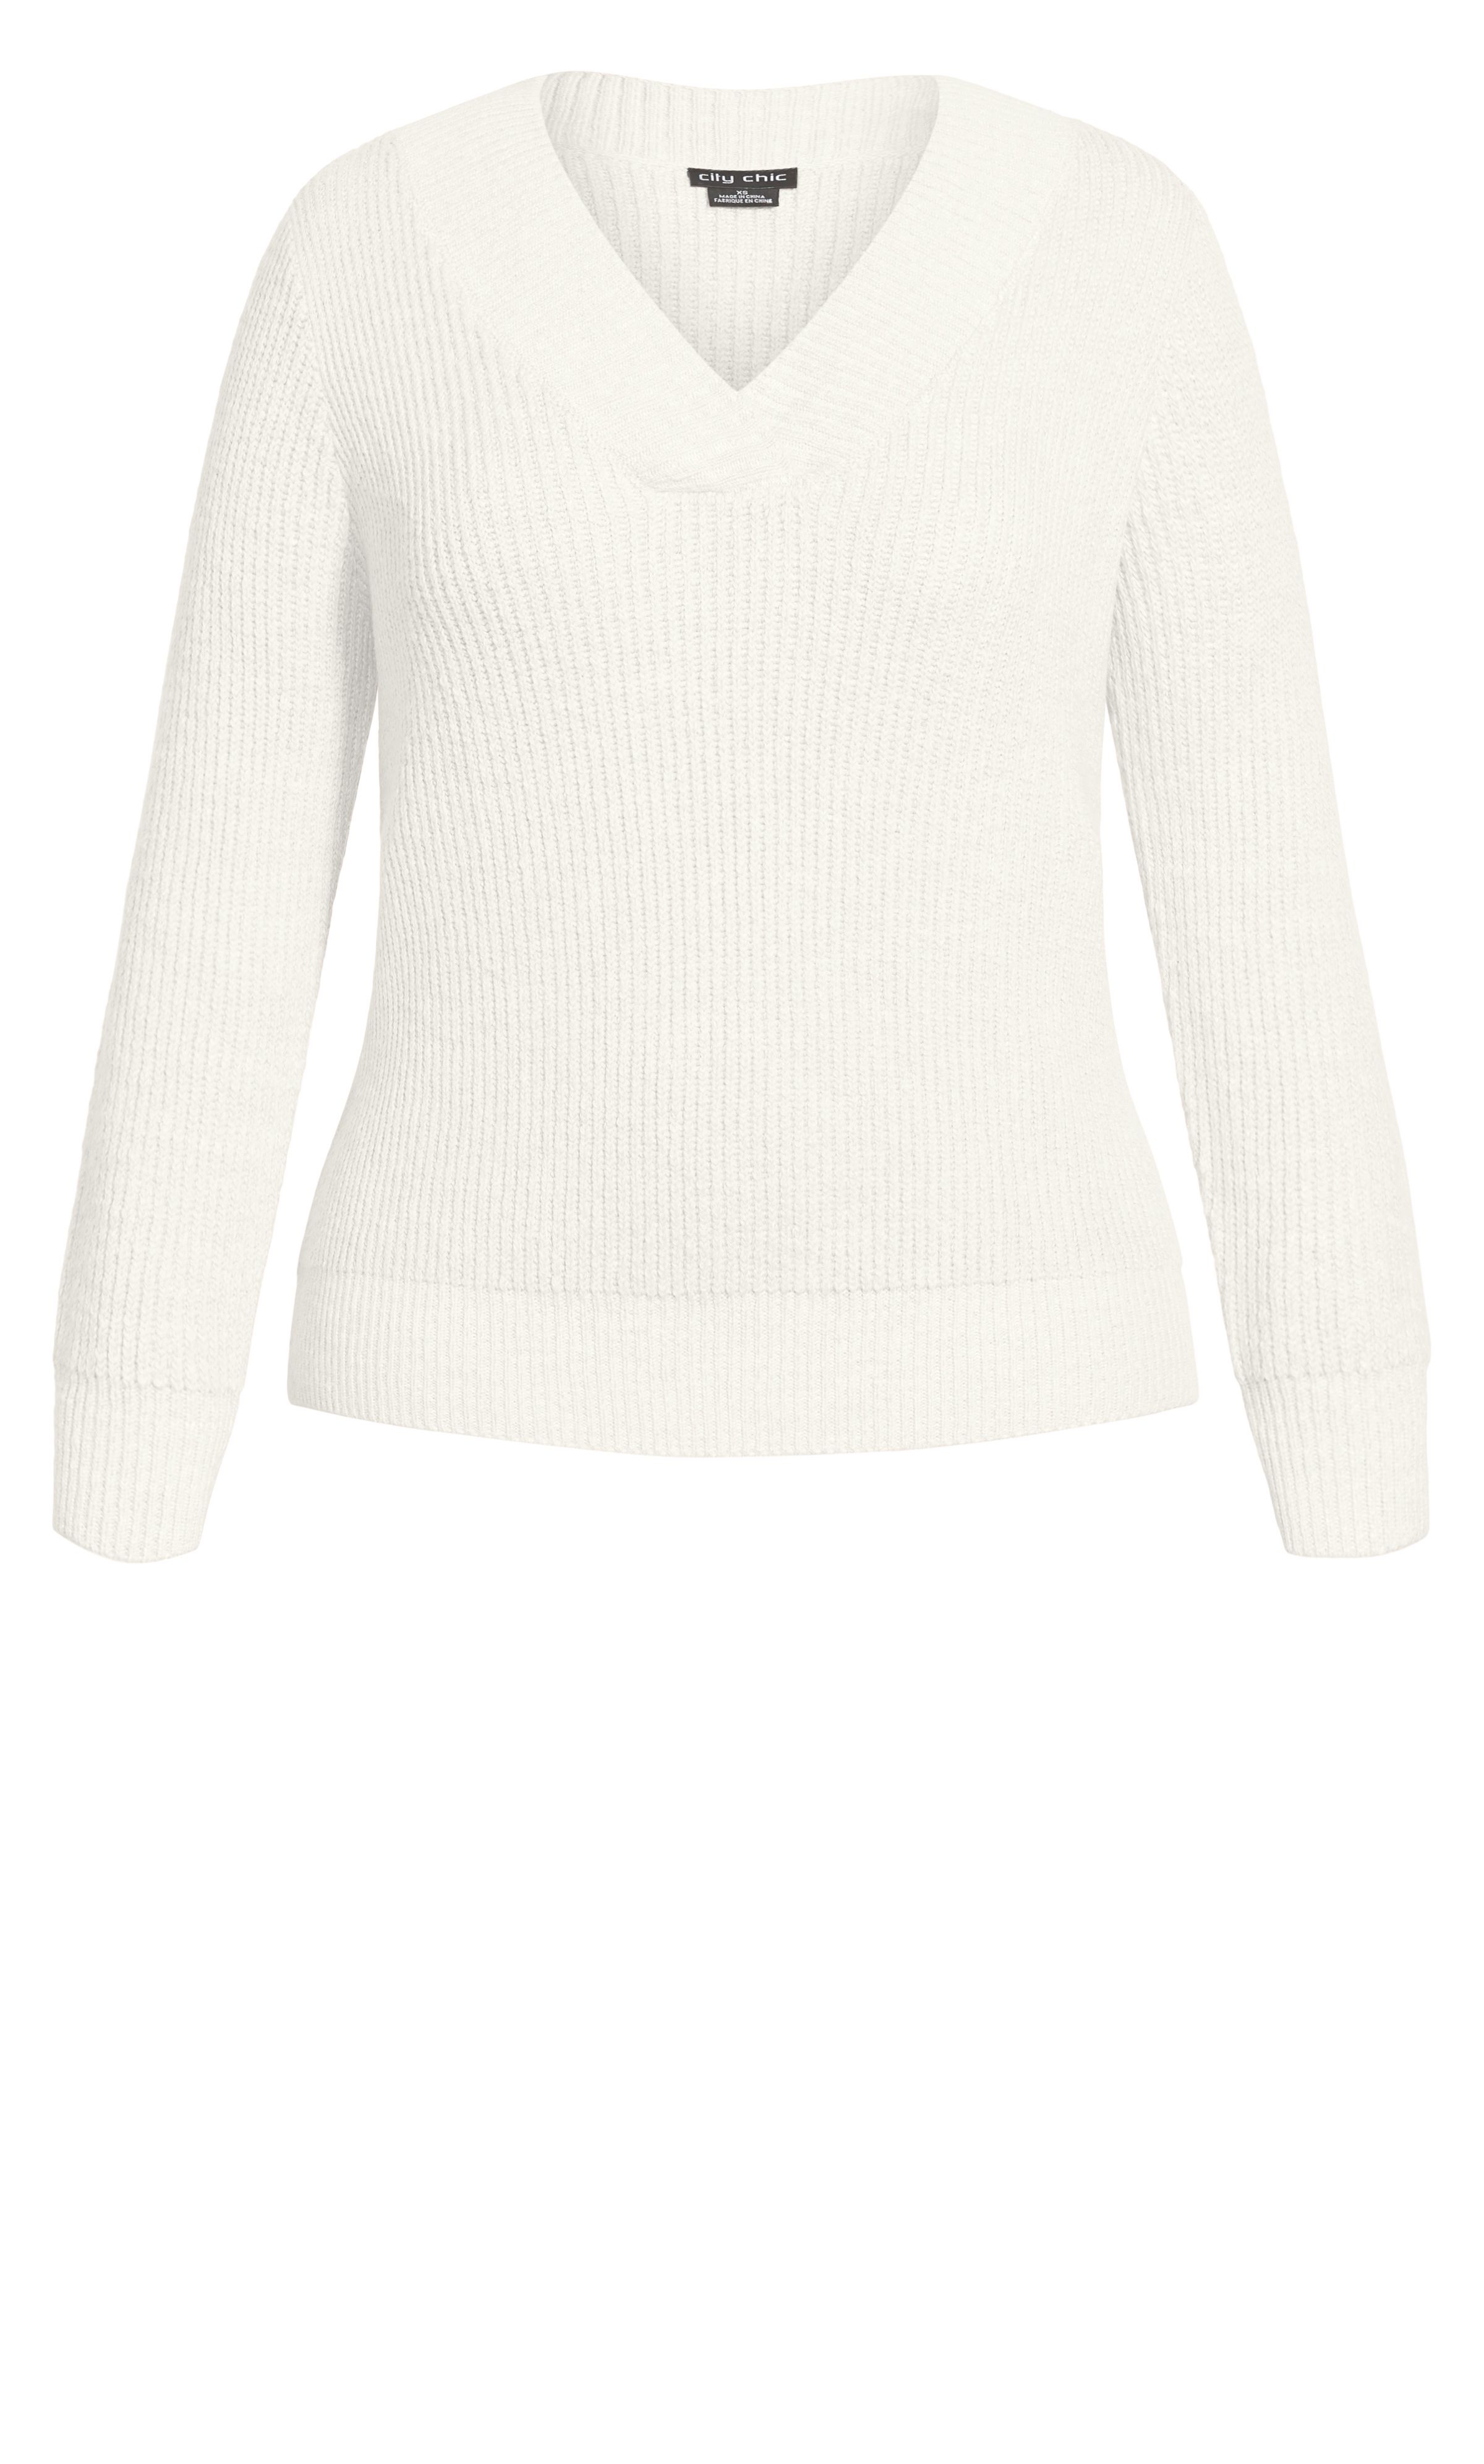 Rug up with style in the Cosy V Jumper. Featuring a deep V-neckline, long sleeves with ribbed cuffs, a relaxed silhouette and a stretch knit construction, this jumper is a bespoke new essential. Key Features Include: - Deep V-neckline - Long sleeves with ribbed cuffs - Relaxed silhouette - Ribbing to hemline - Stretch rib knit construction Match this jumper to a pair of mid wash denim jeans for a casual style.